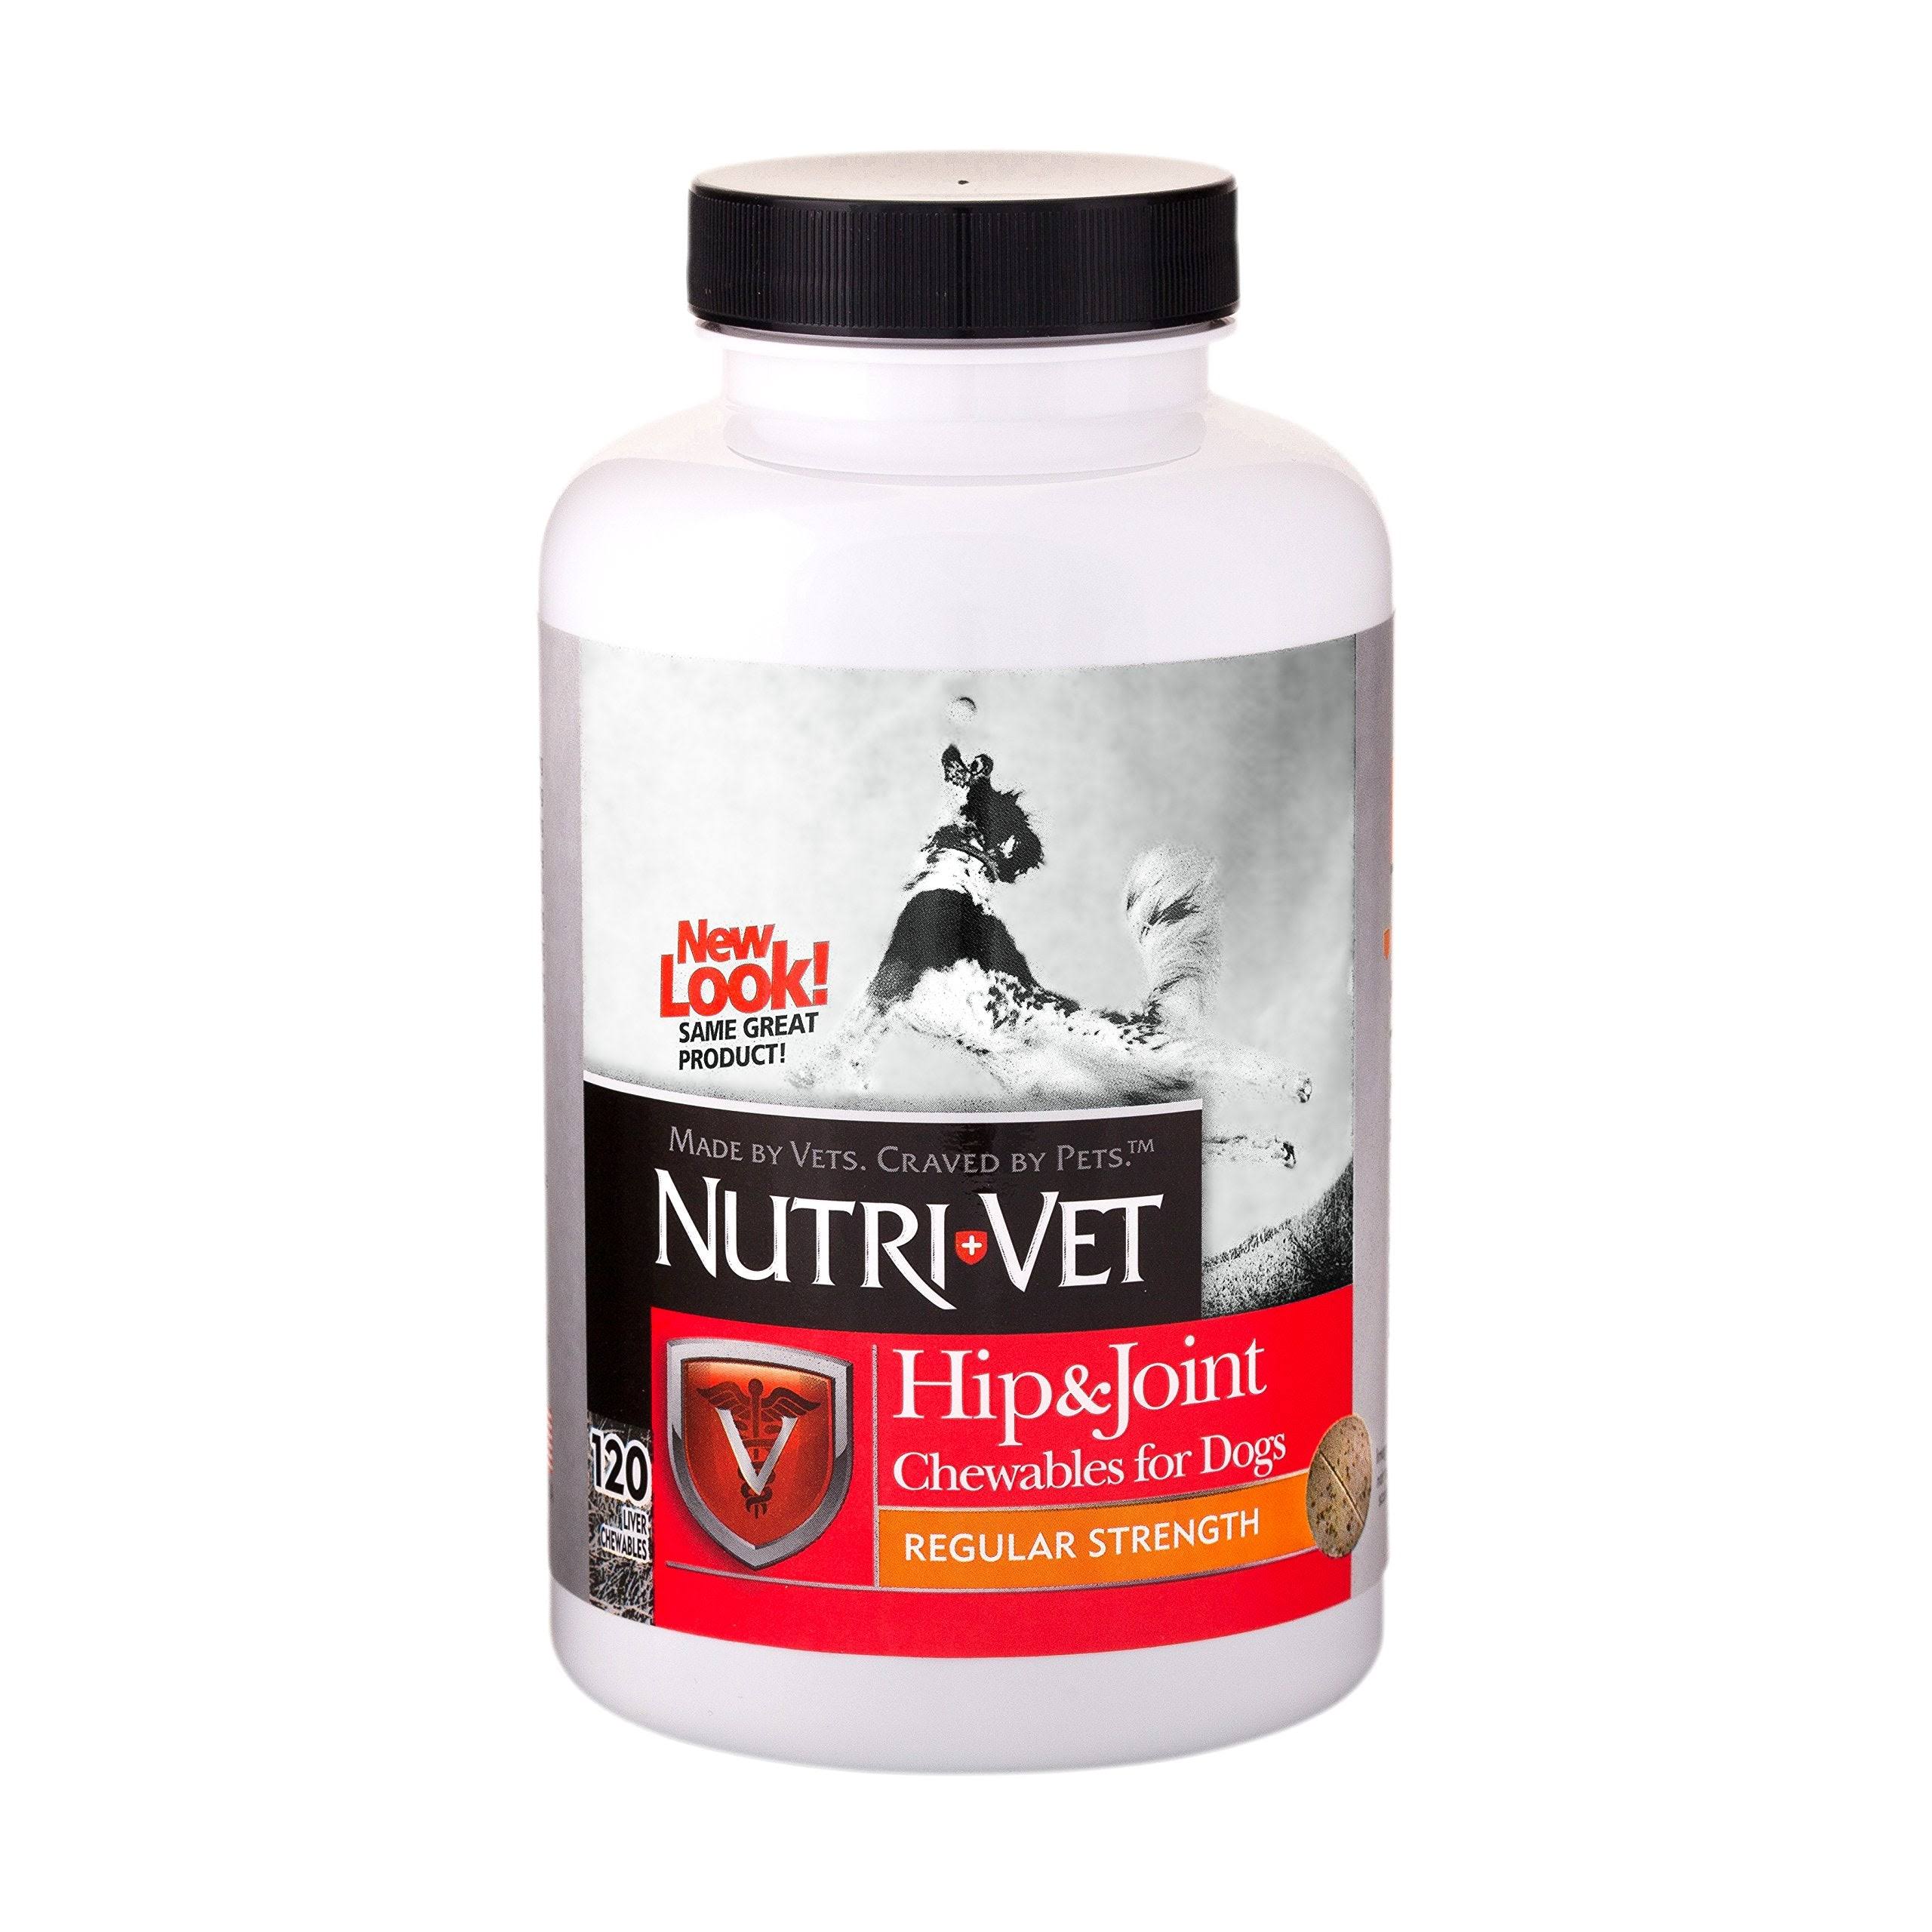 Nutri-Vet Hip and Joint Dog Chewables - 120ct